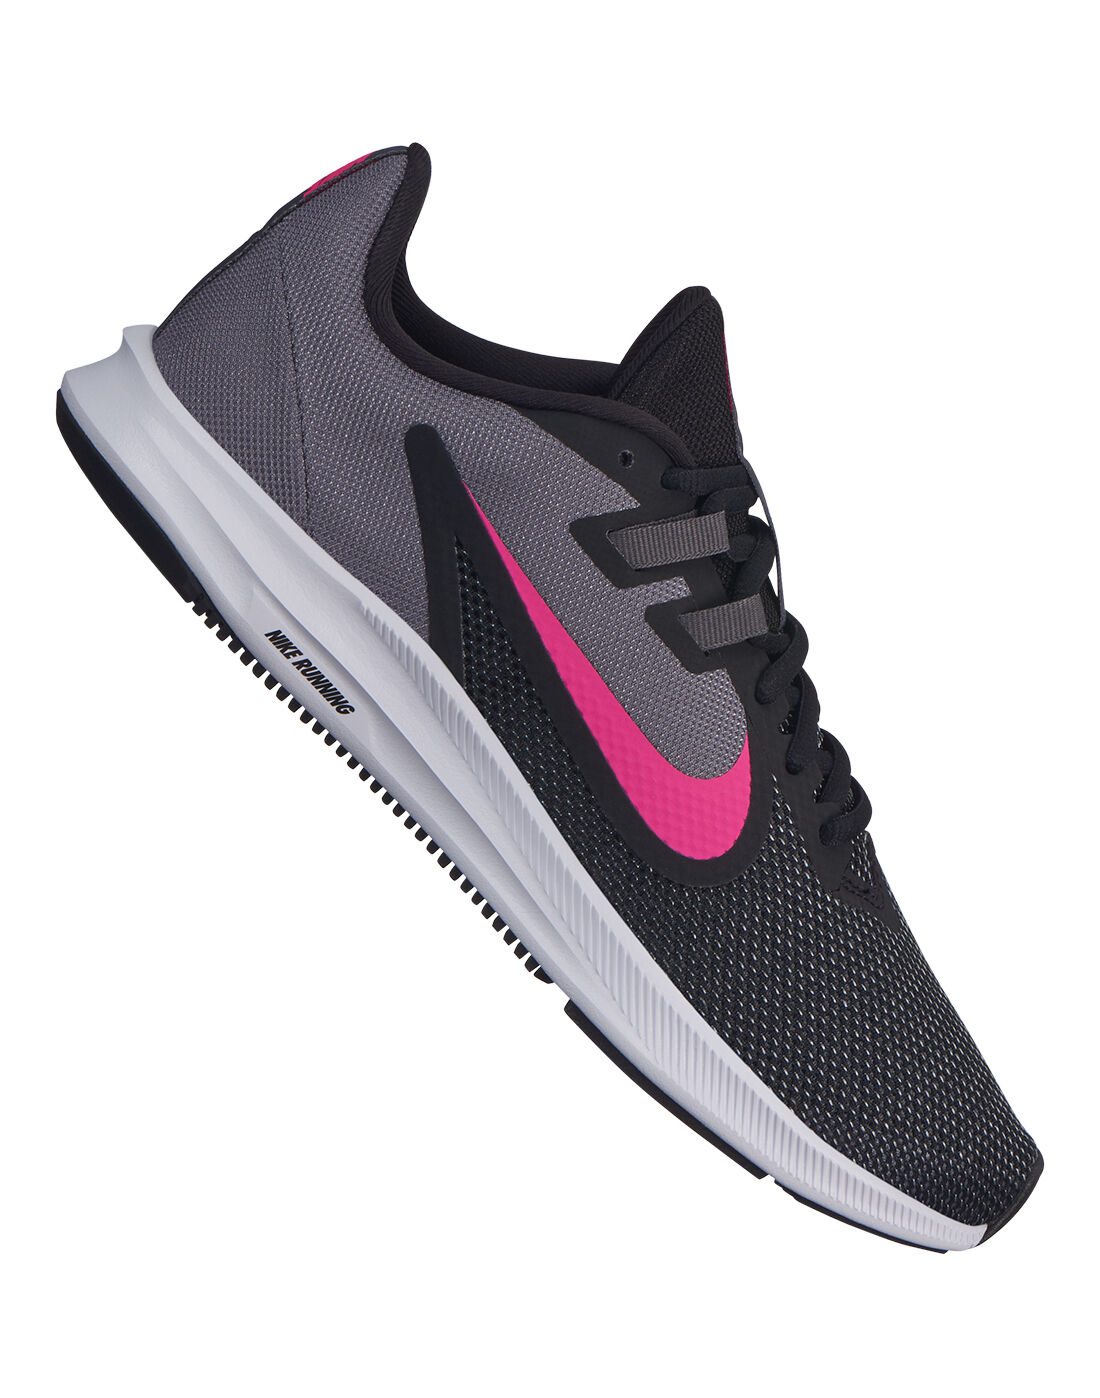 pink and black nikes womens